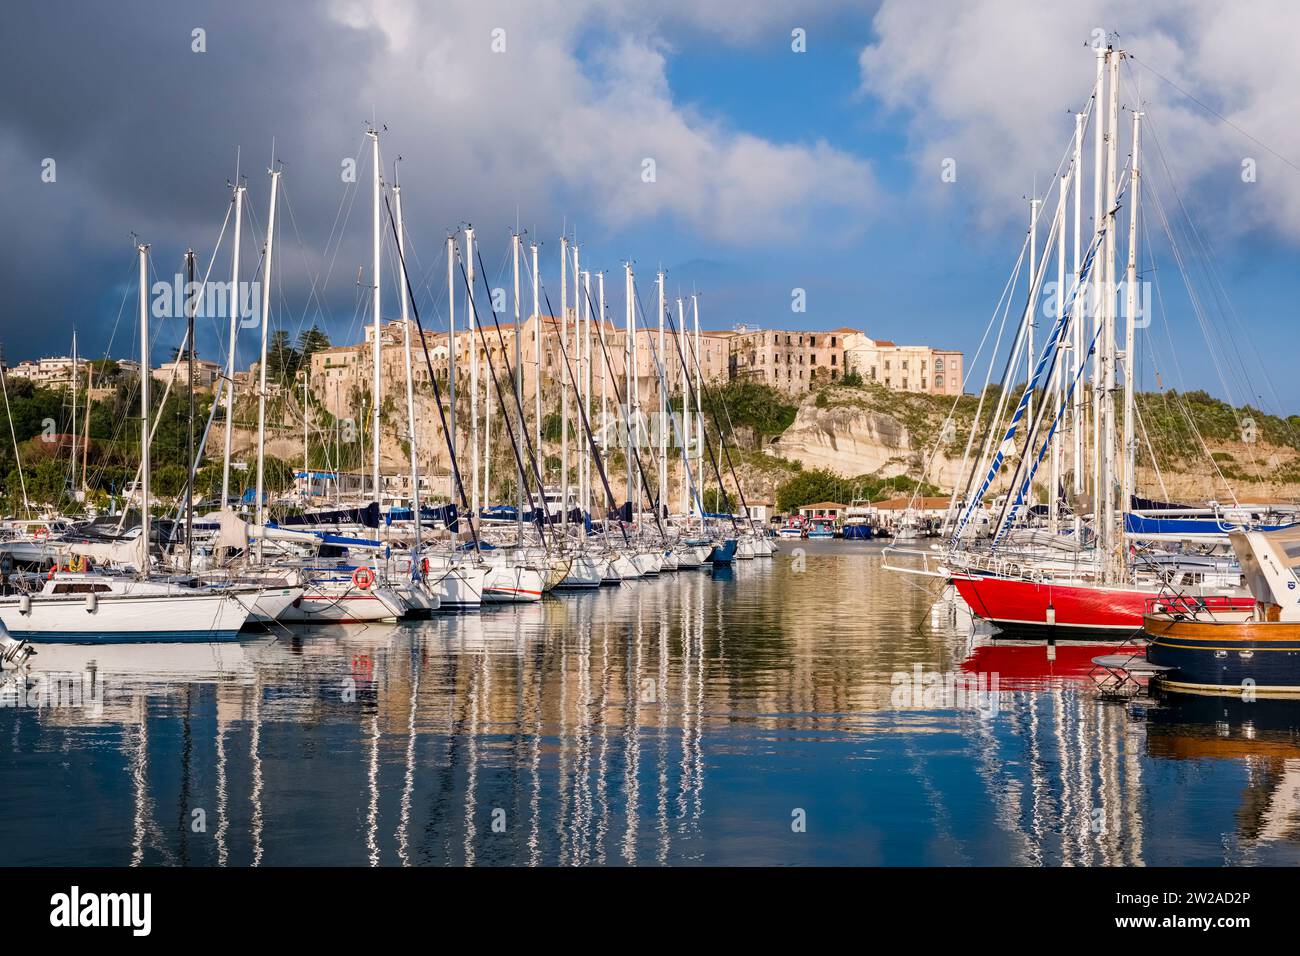 Sailing boats at anchor in the harbour and marina of Tropea, the houses of the town on a rock cliff in the distance. Stock Photo